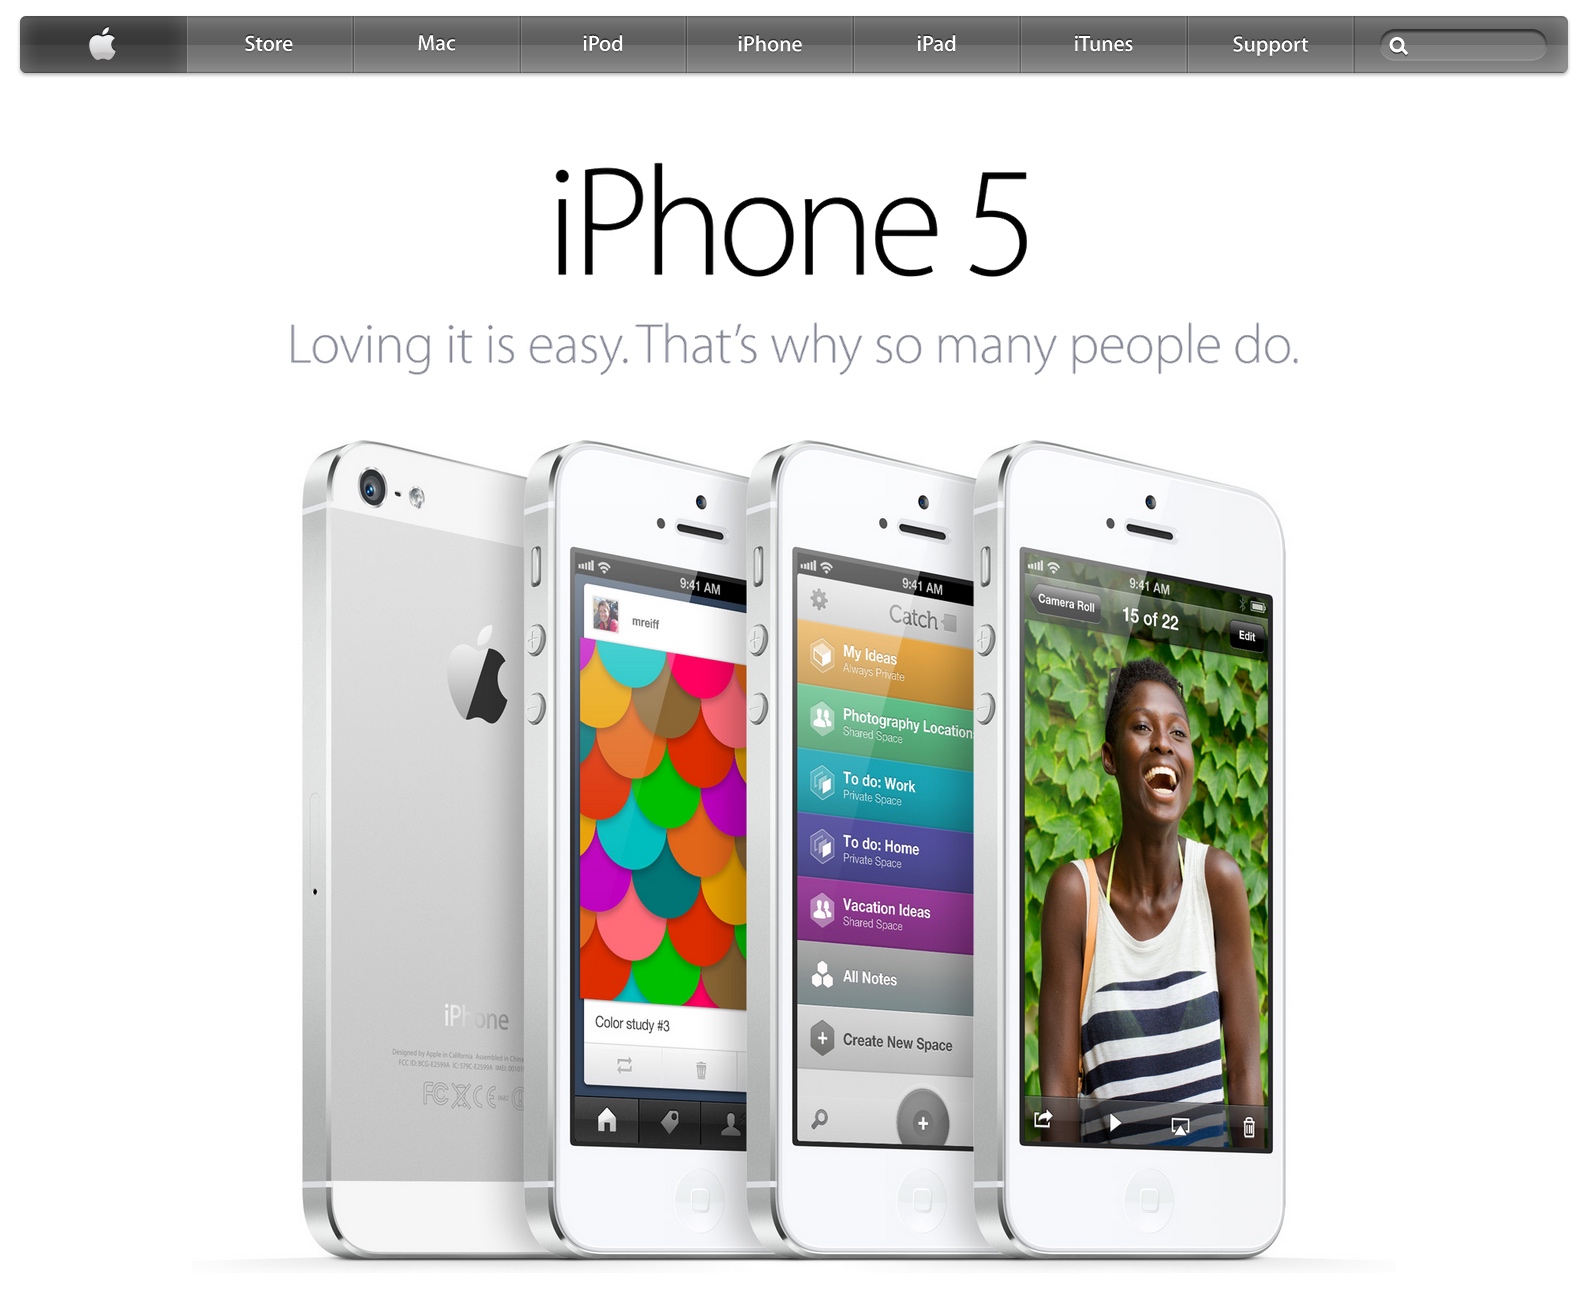 Apple homepage showing iPhone 5 (2013)